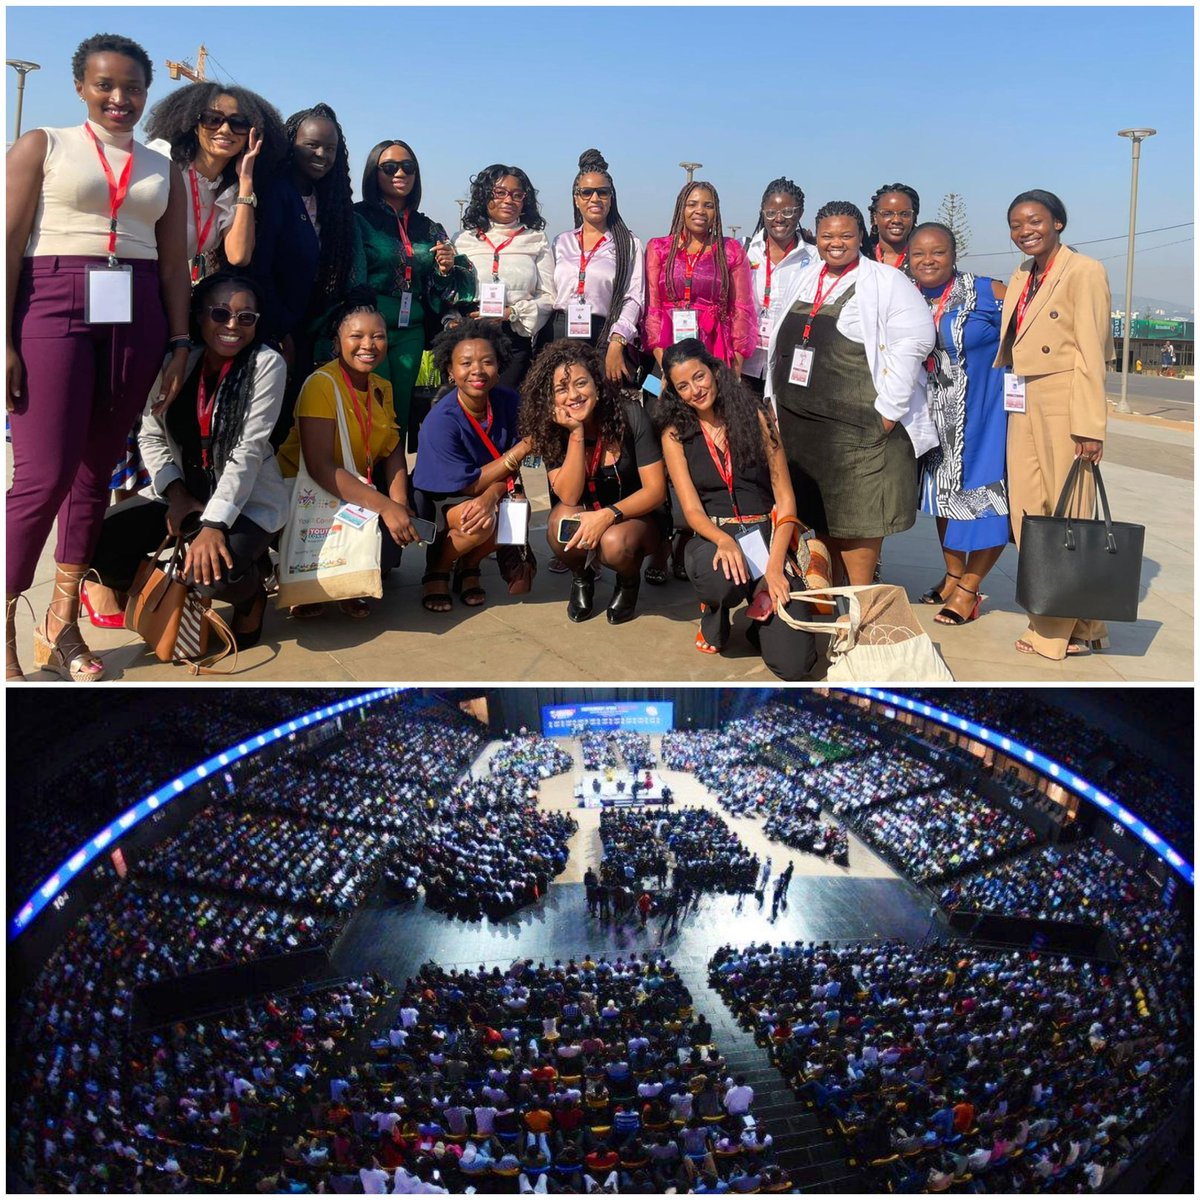 Proud to see our African Young Women Leadership Fellows (#AfYWL) at #YouthConnekt2022 They are amongst the youth driving the future of dev in #Africa & we are proud to be nurturing their incredible skills & talents through their fellowship with @UNDP